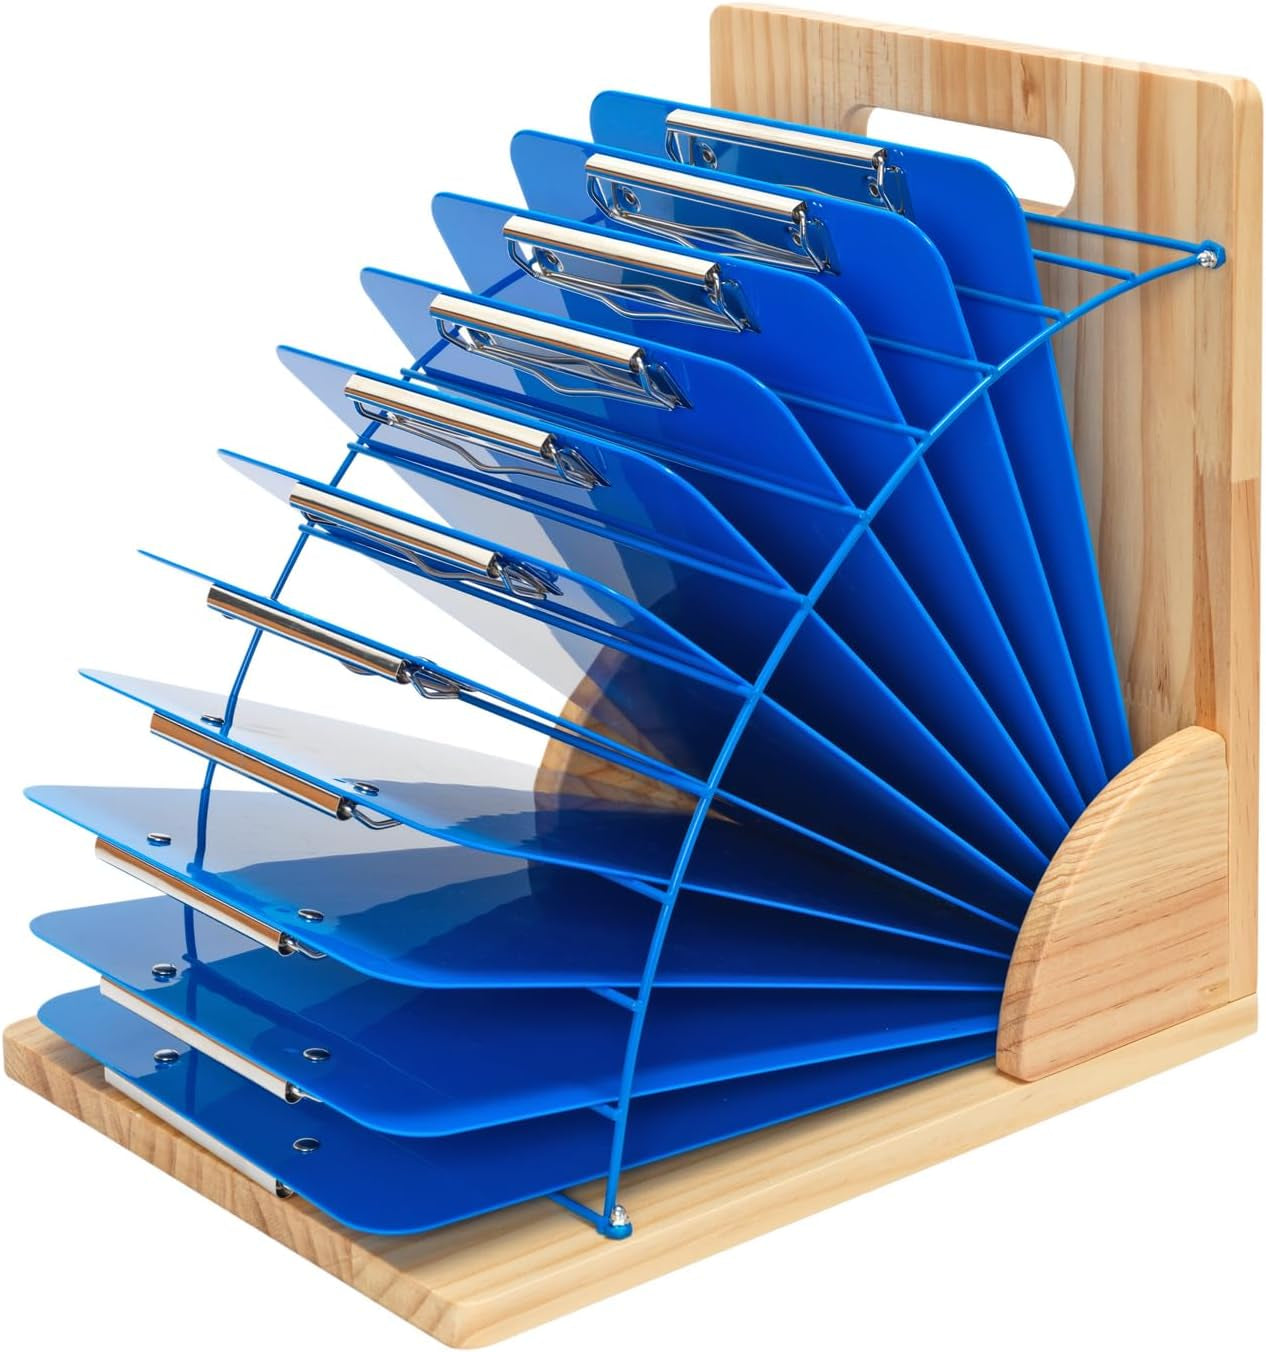 Store More Clipboard Stand - Organizational Tool, Easy Assembly, Sturdy Clipboard Holder - Teacher Supplies, Home Office Storage